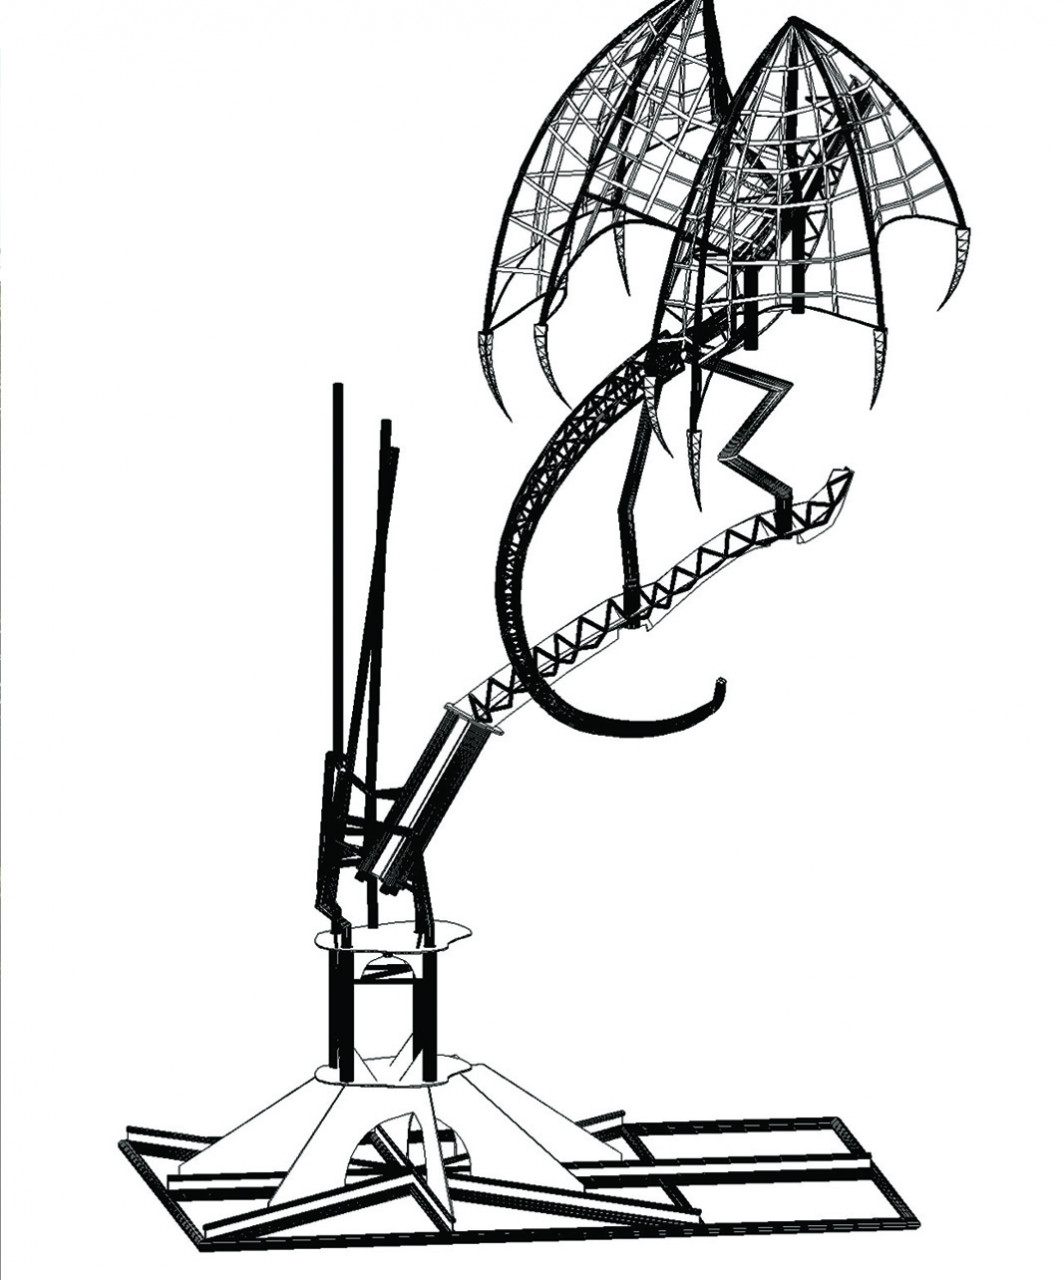 The computer model of the Armature